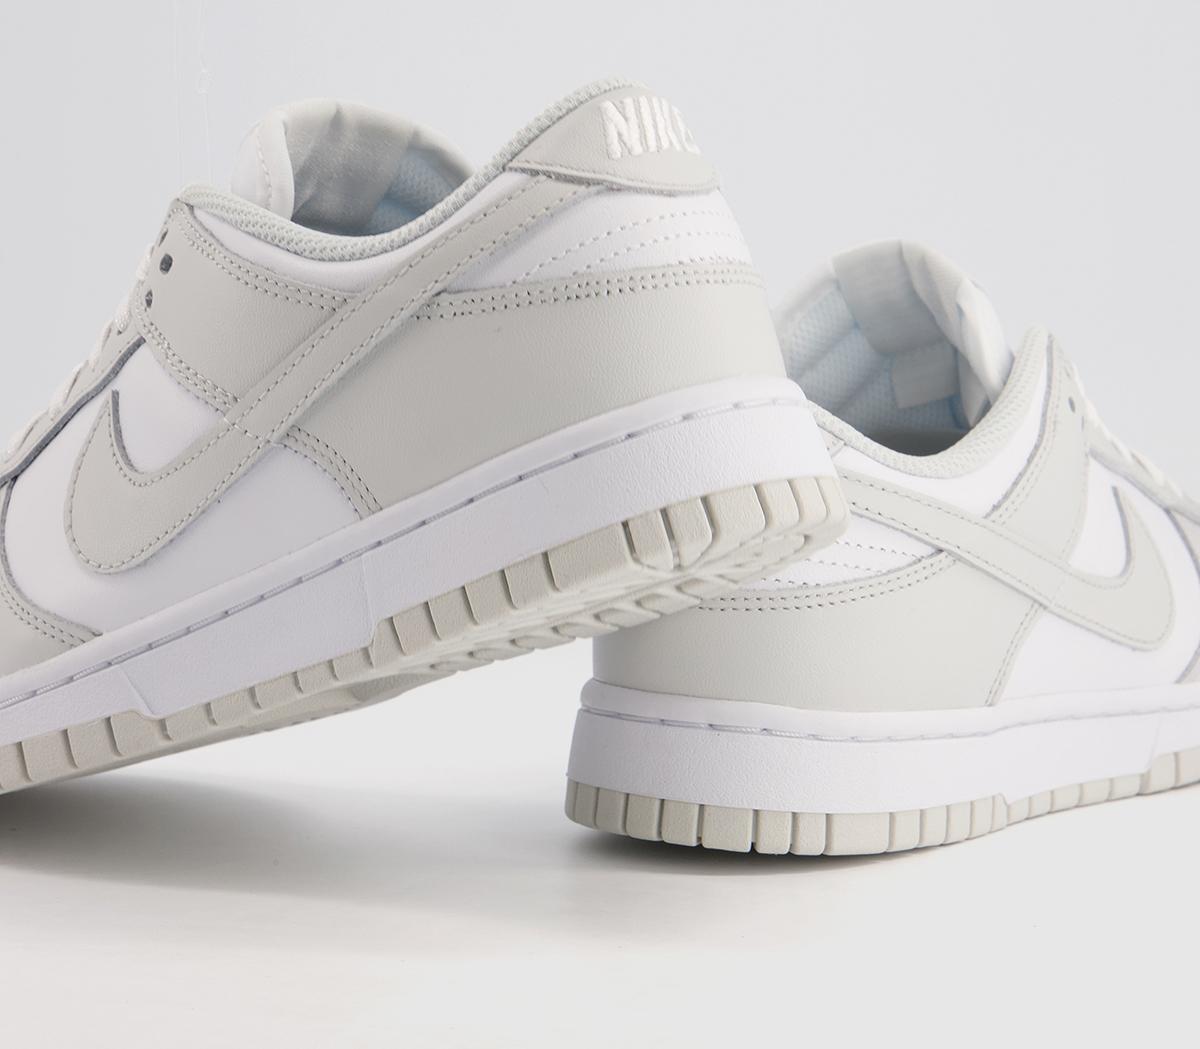 Nike Dunk Low Trainers White Photon Dust White - Nike Dunk